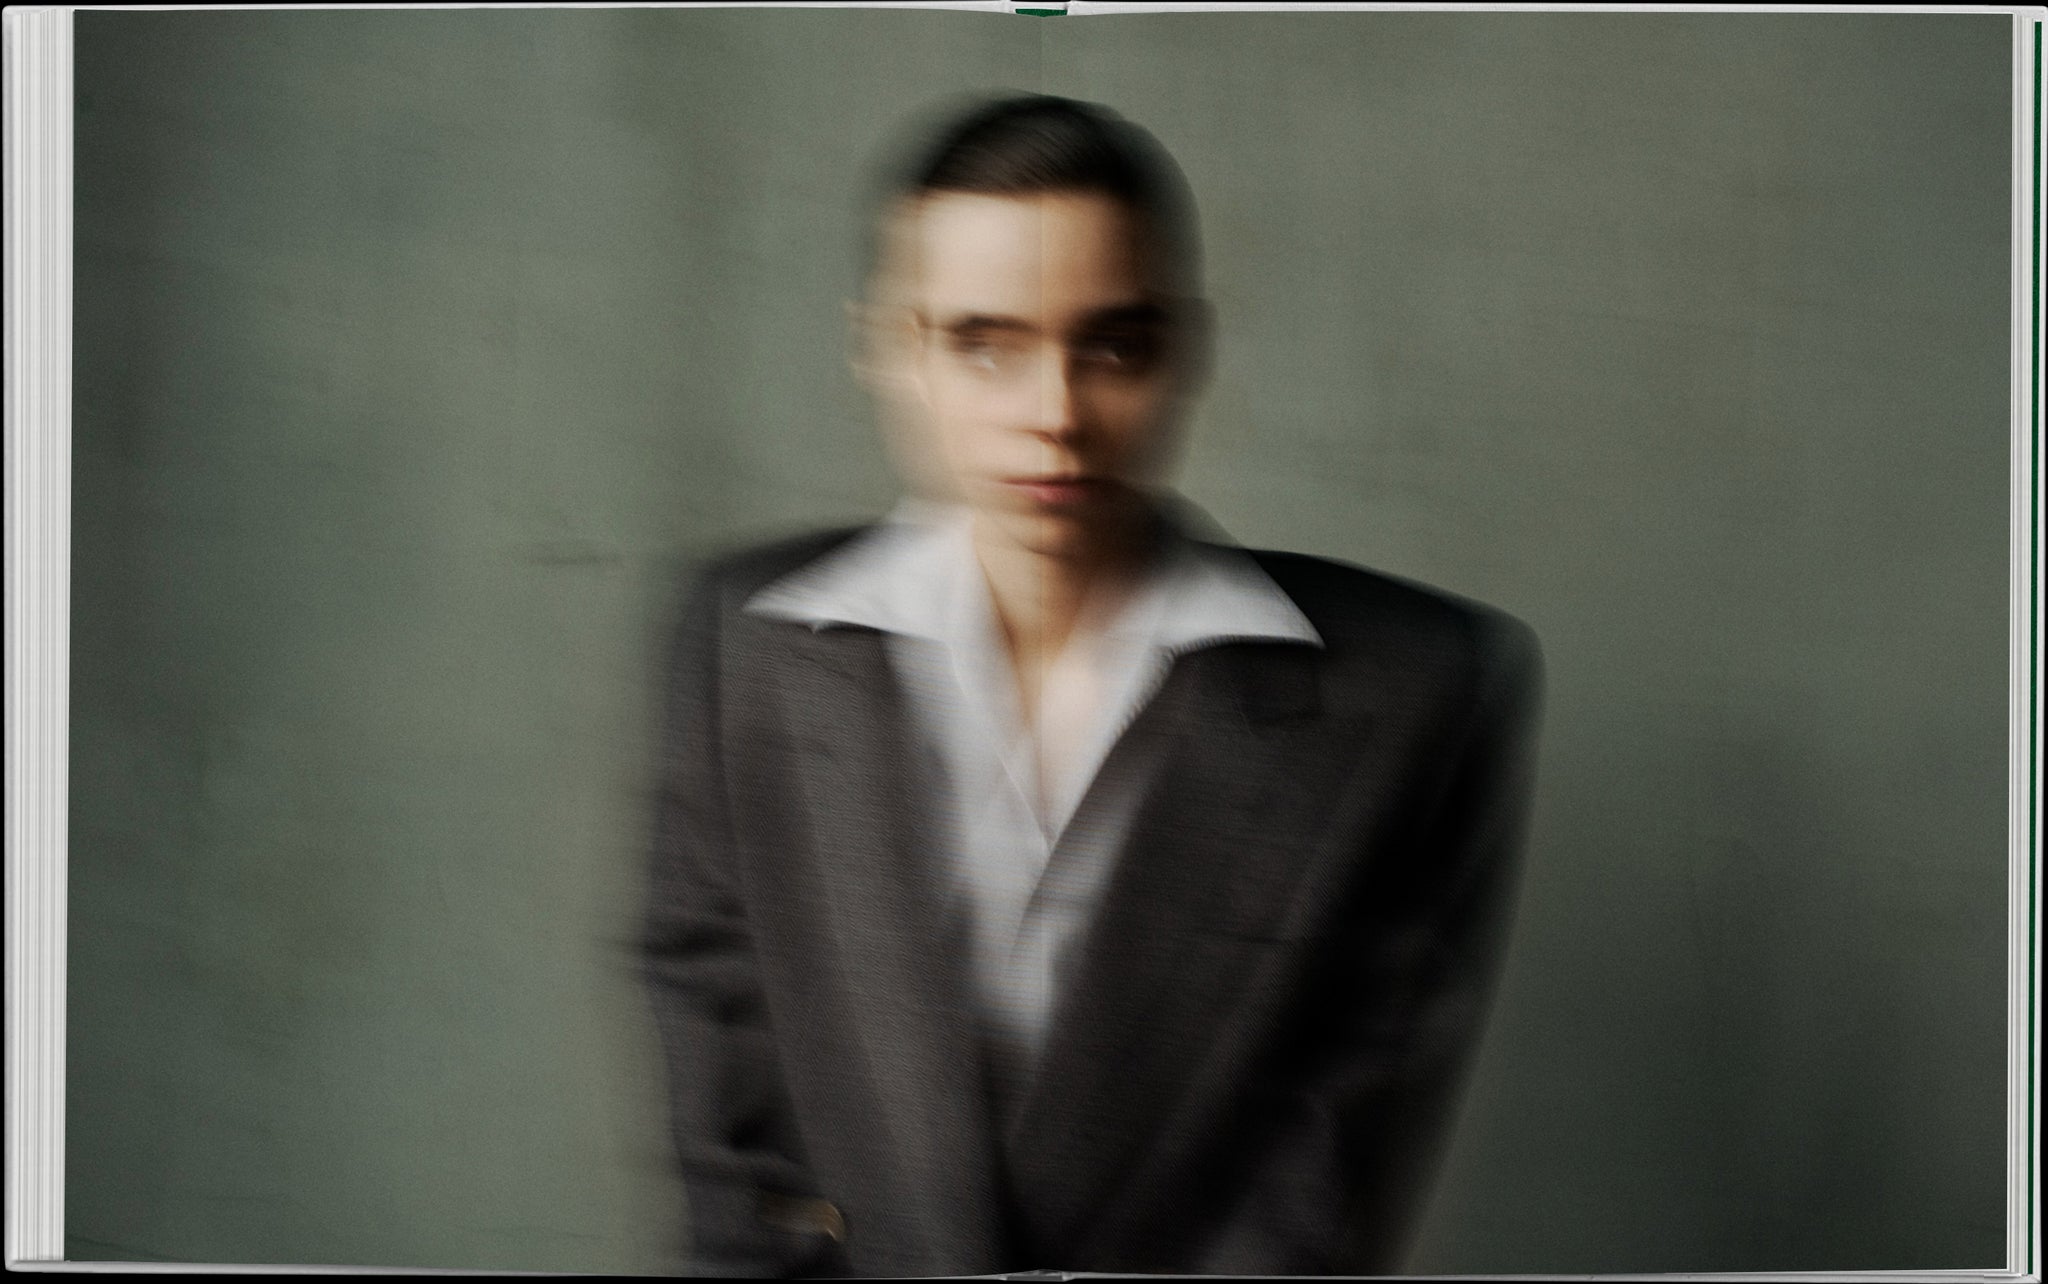 Book layout. Double spread. Blurred image of a girl in a suit with a white collar out. Greenish-grey background.